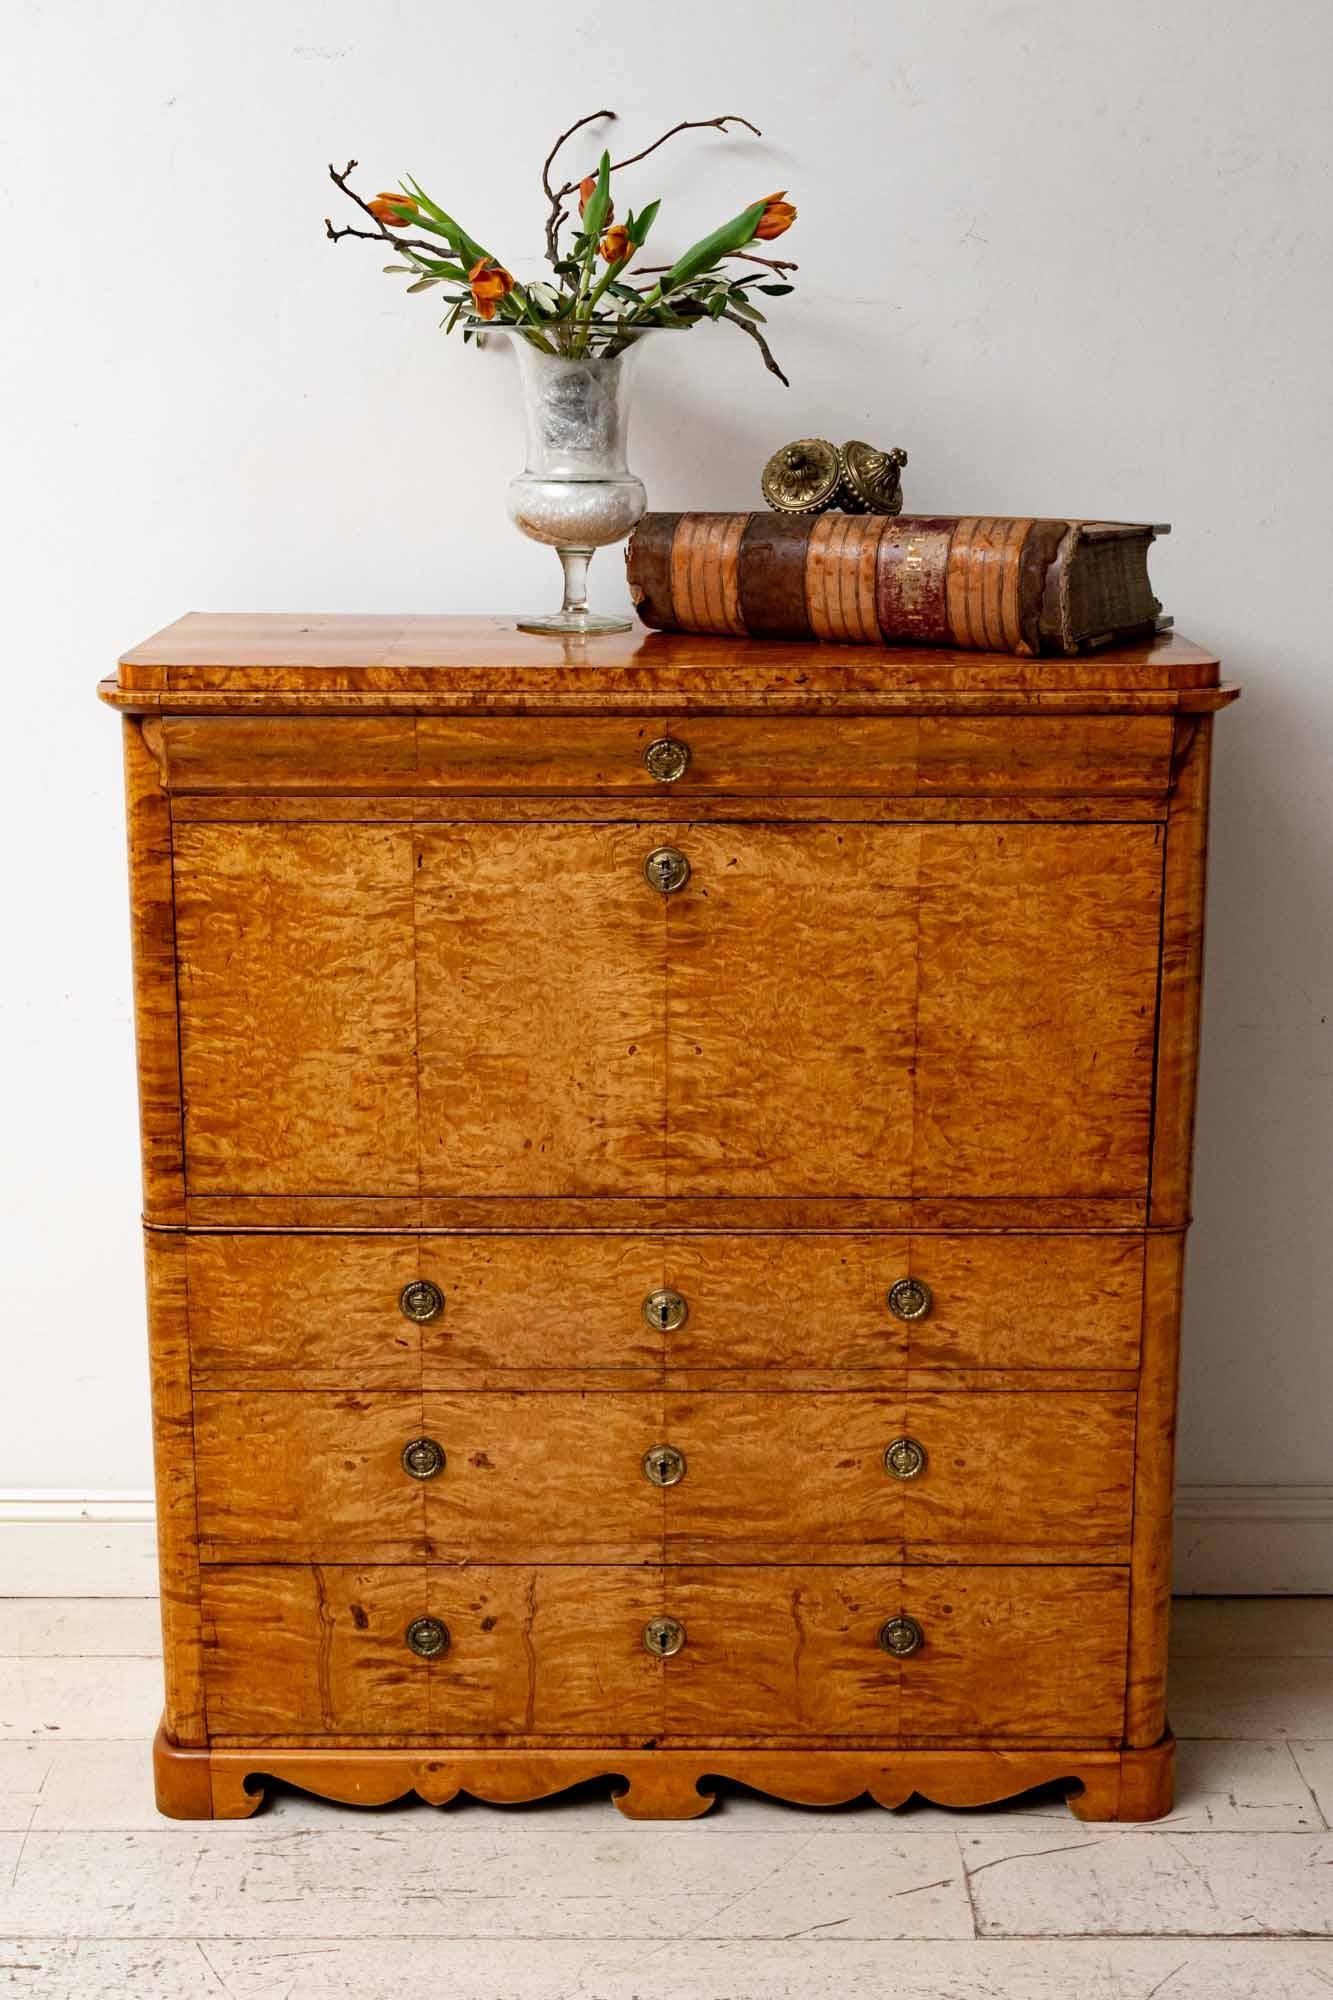 An exceptional 19th century Swedish Birch secretaire or Bureau with a beautiful grain and warm mellow color.
It features one long shallow top drawer over a fall front which opens with a key to reveal a stunning polished interior featuring many